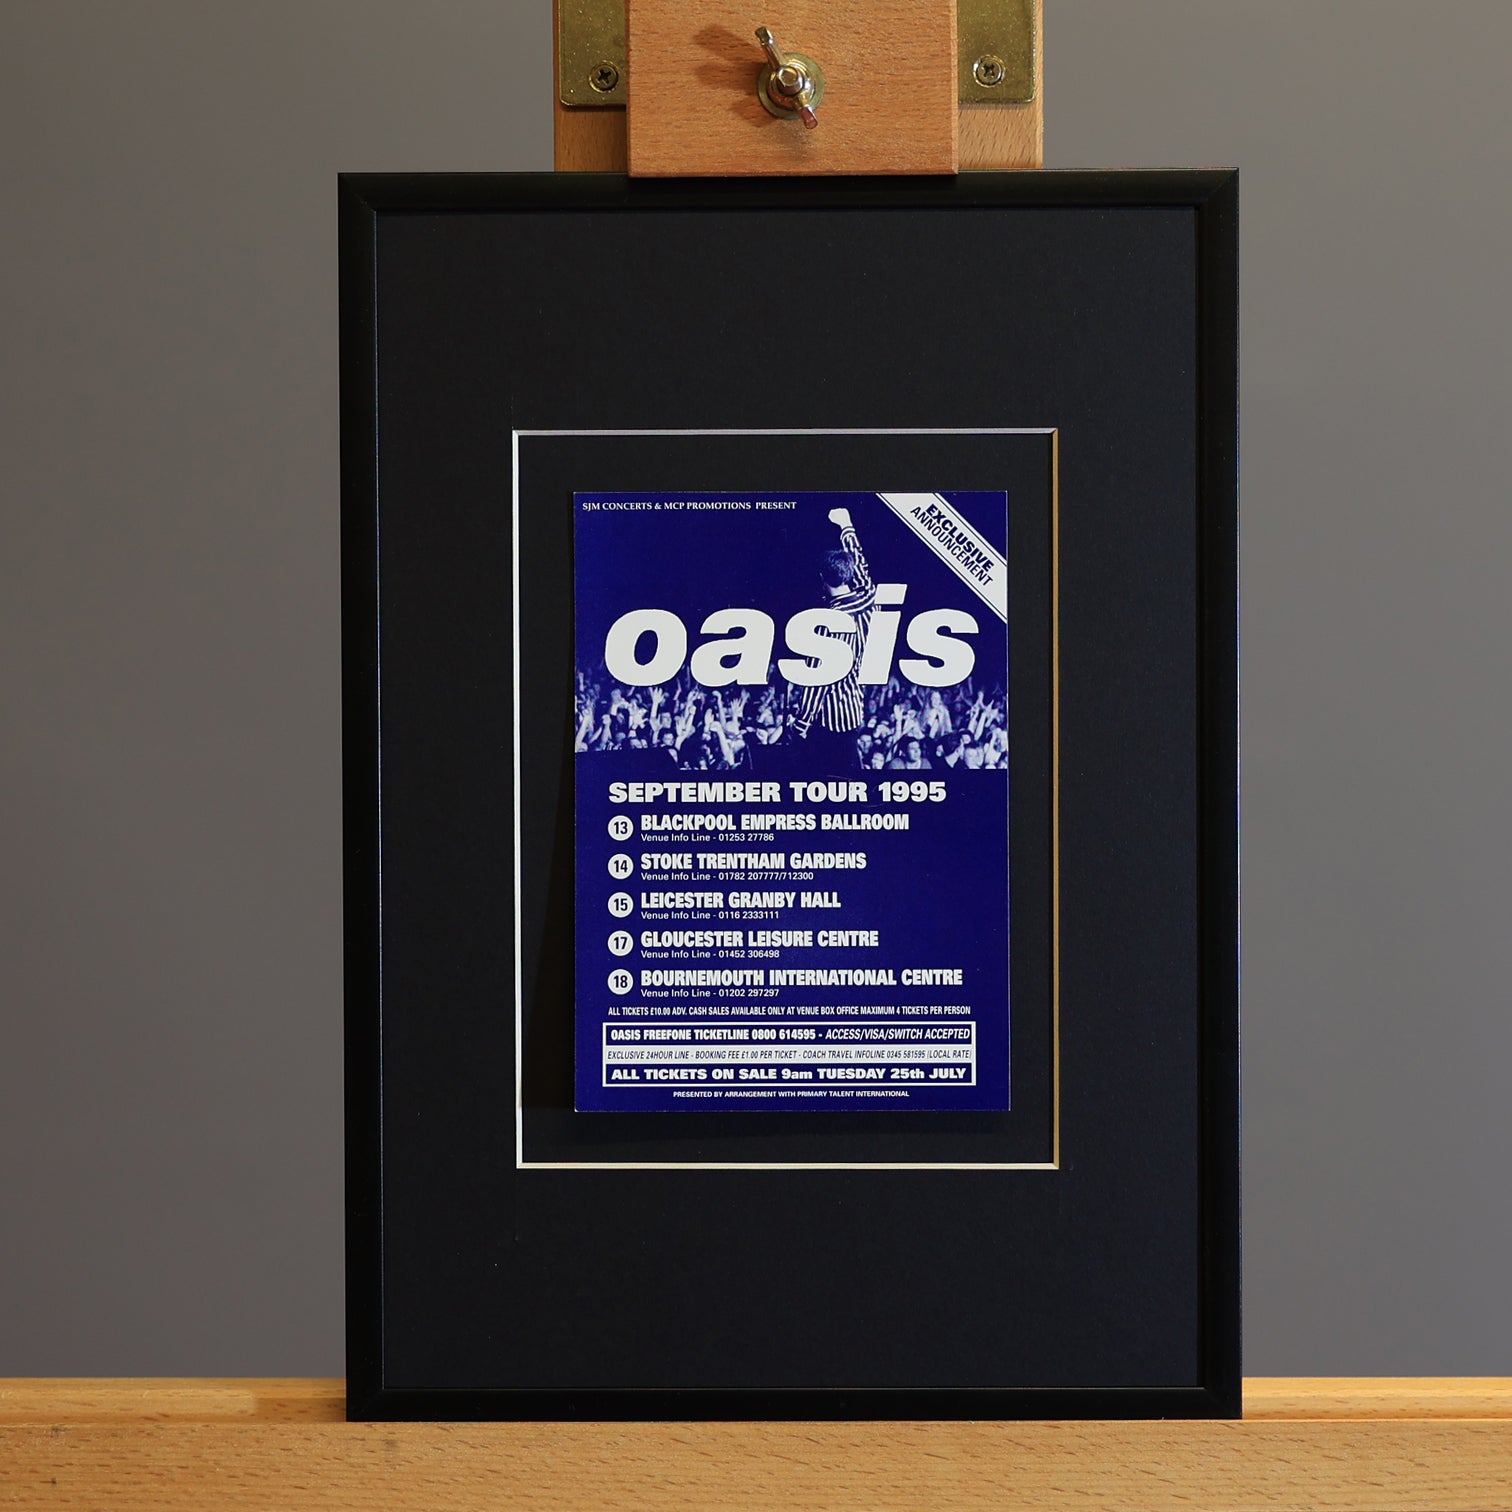 Oasis 1995 September Tour Announcement Card - New Item